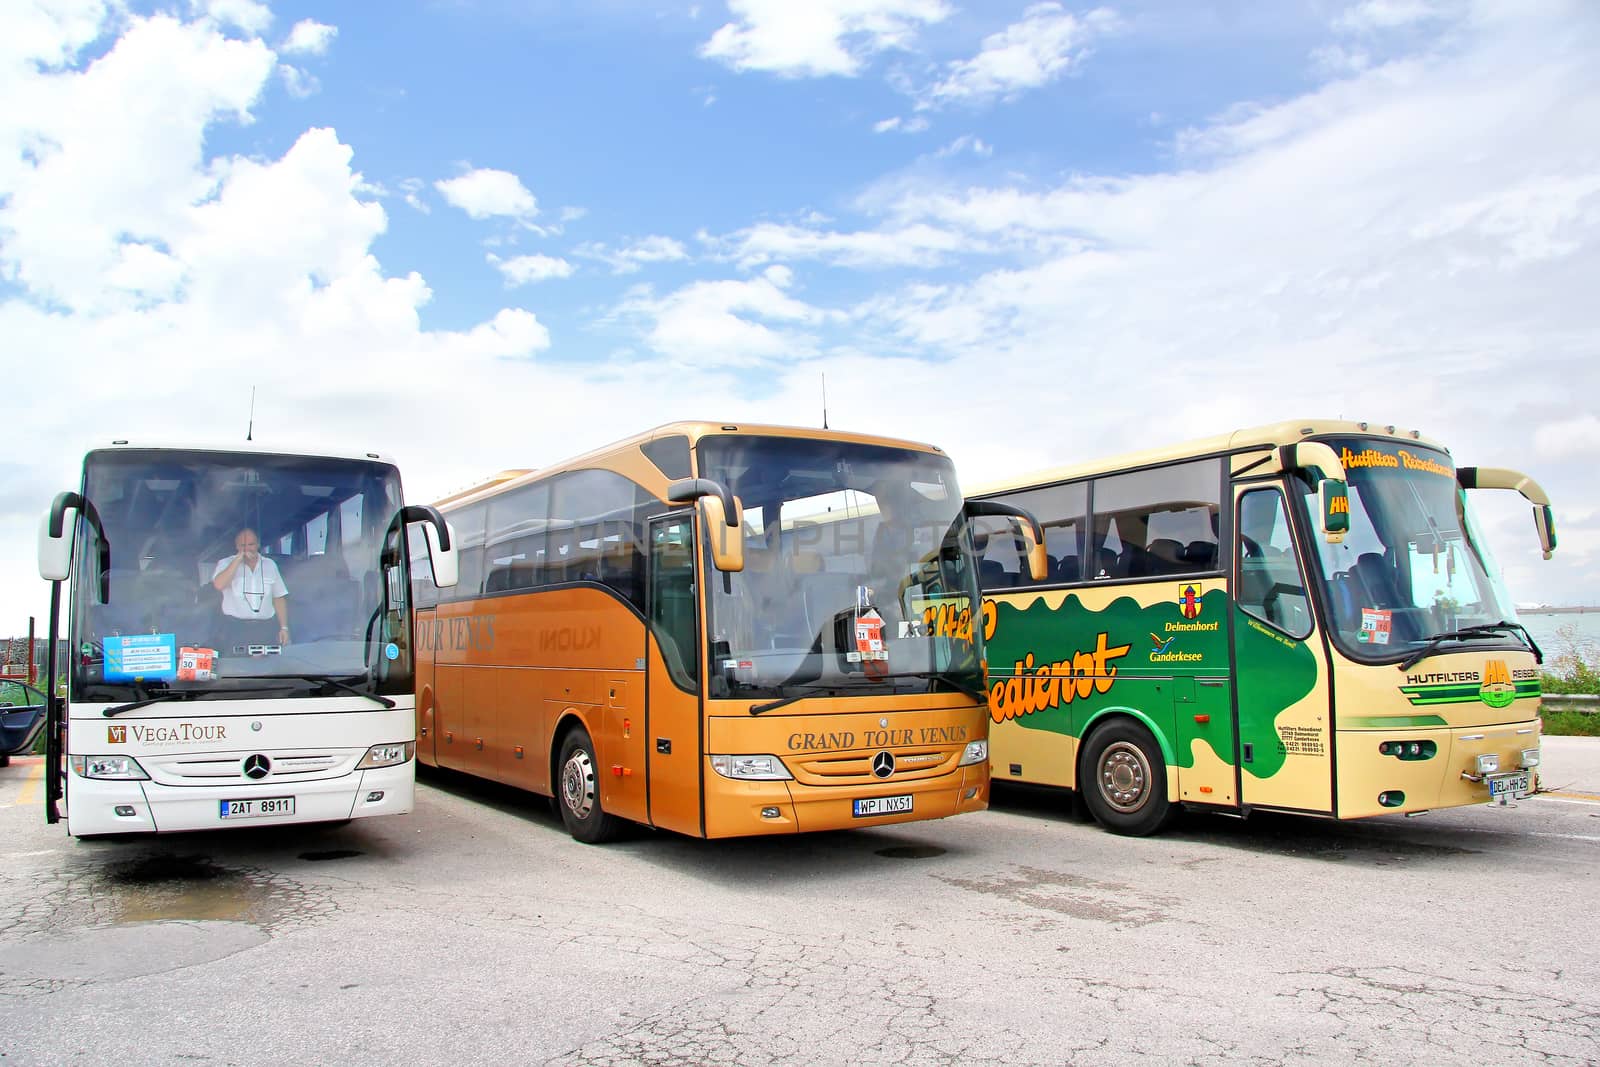 VENICE, ITALY - JULY 30, 2014: Interurban coaches at the touristic bus station.